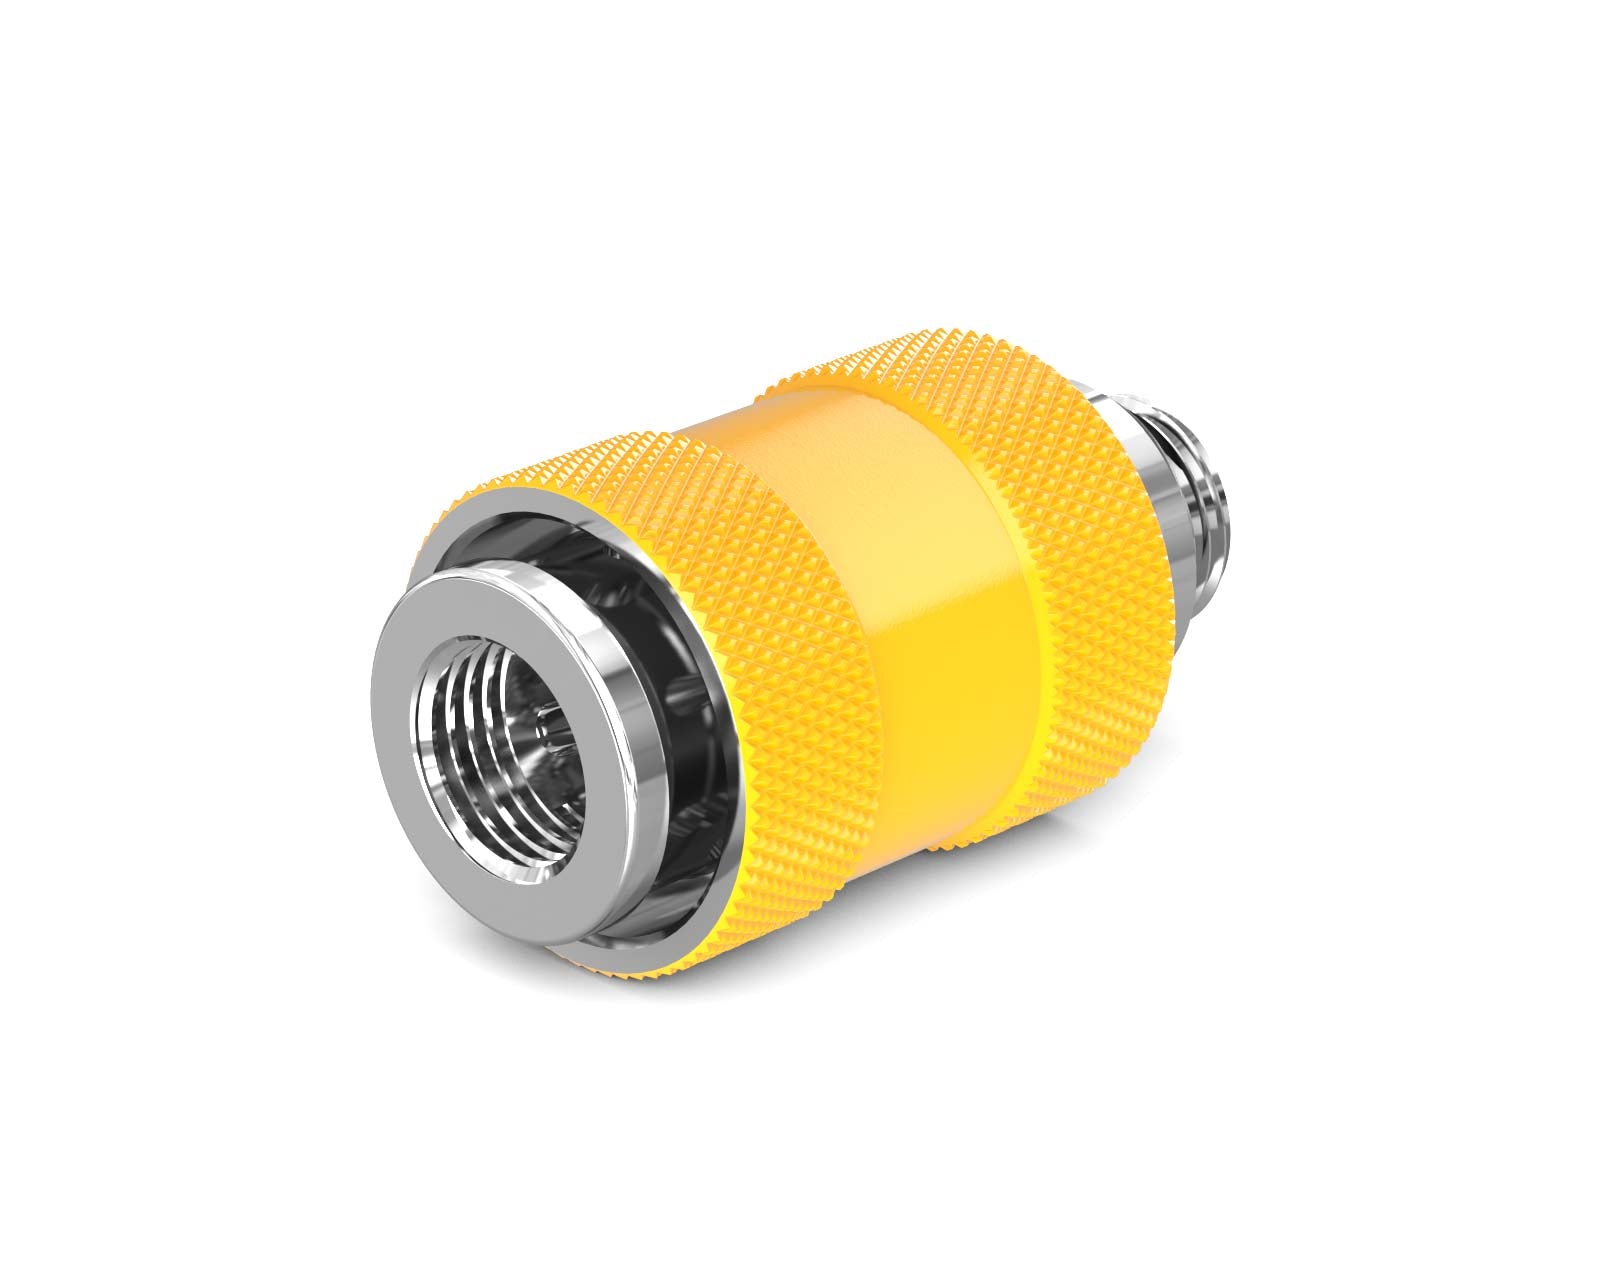 PrimoChill Male to Female G 1/4 SX Pull Drain Valve - PrimoChill - KEEPING IT COOL Yellow